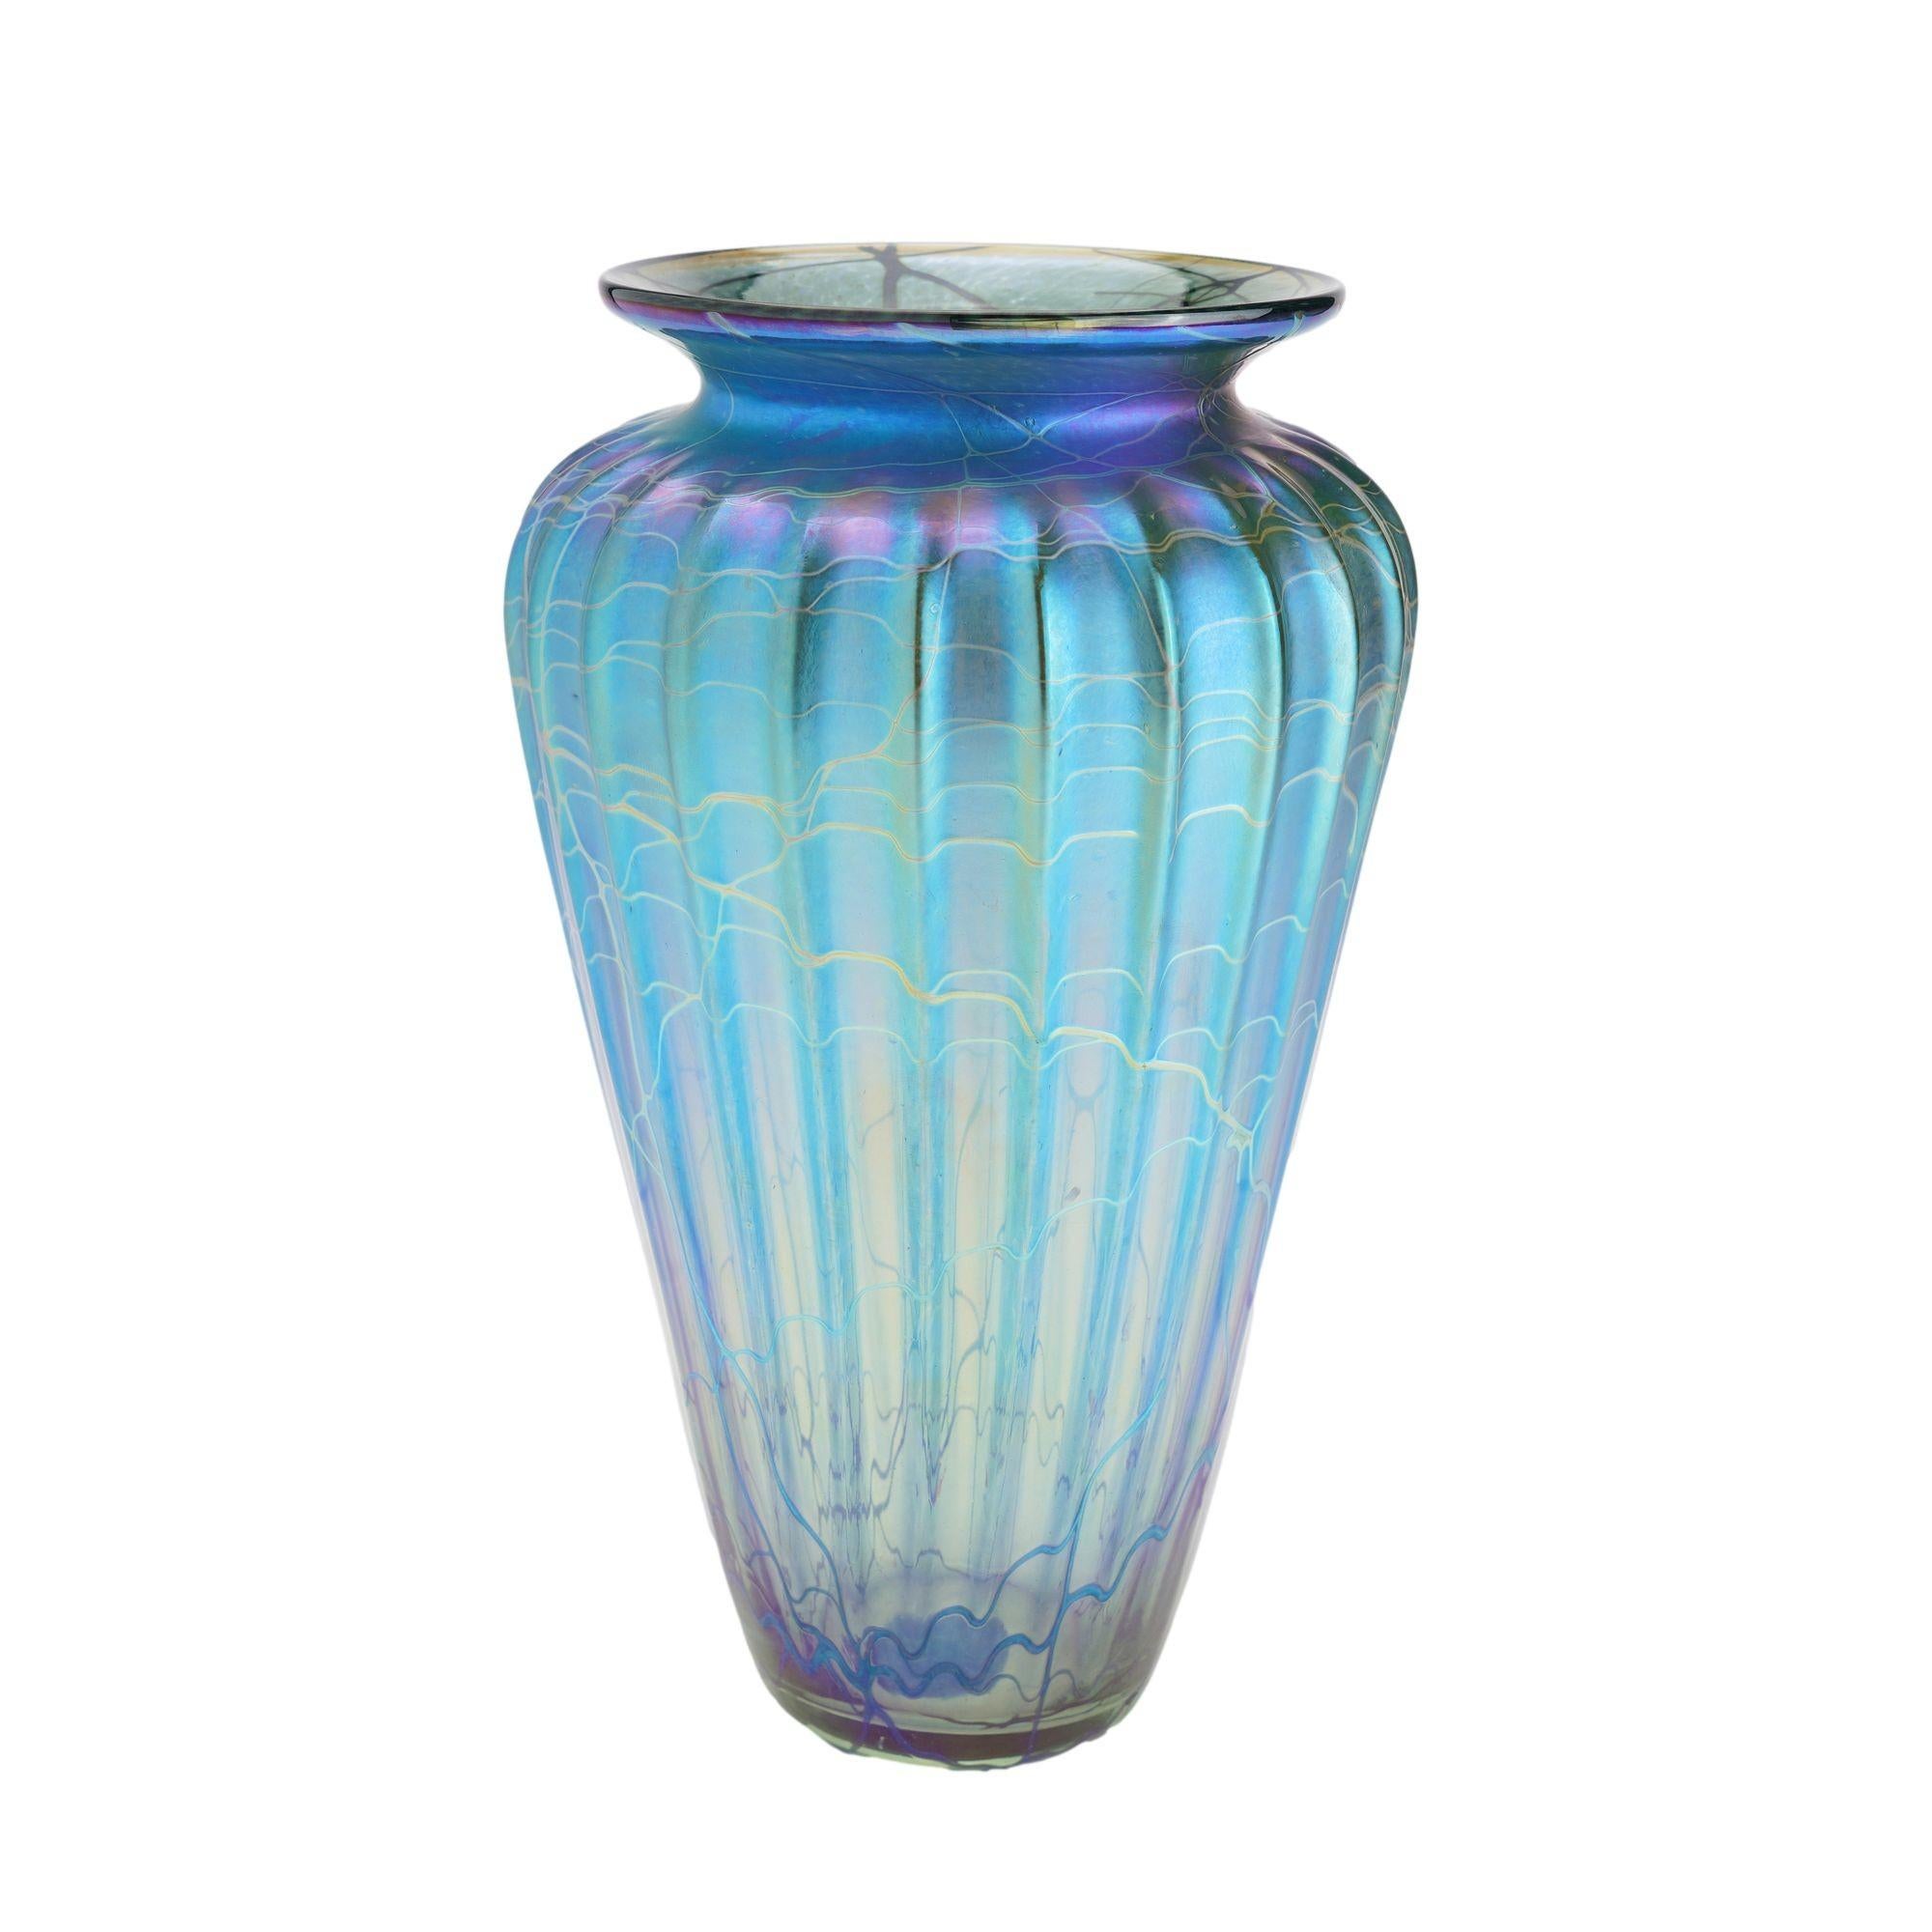 Iridescent blue blown glass vase with a tapered and fluted body, footed vase, and waisted flared rim. The glass has exceptional depth to it and the iridescence is luminous in shades of blue and purple.
Manhattan Beach, California, 2015.